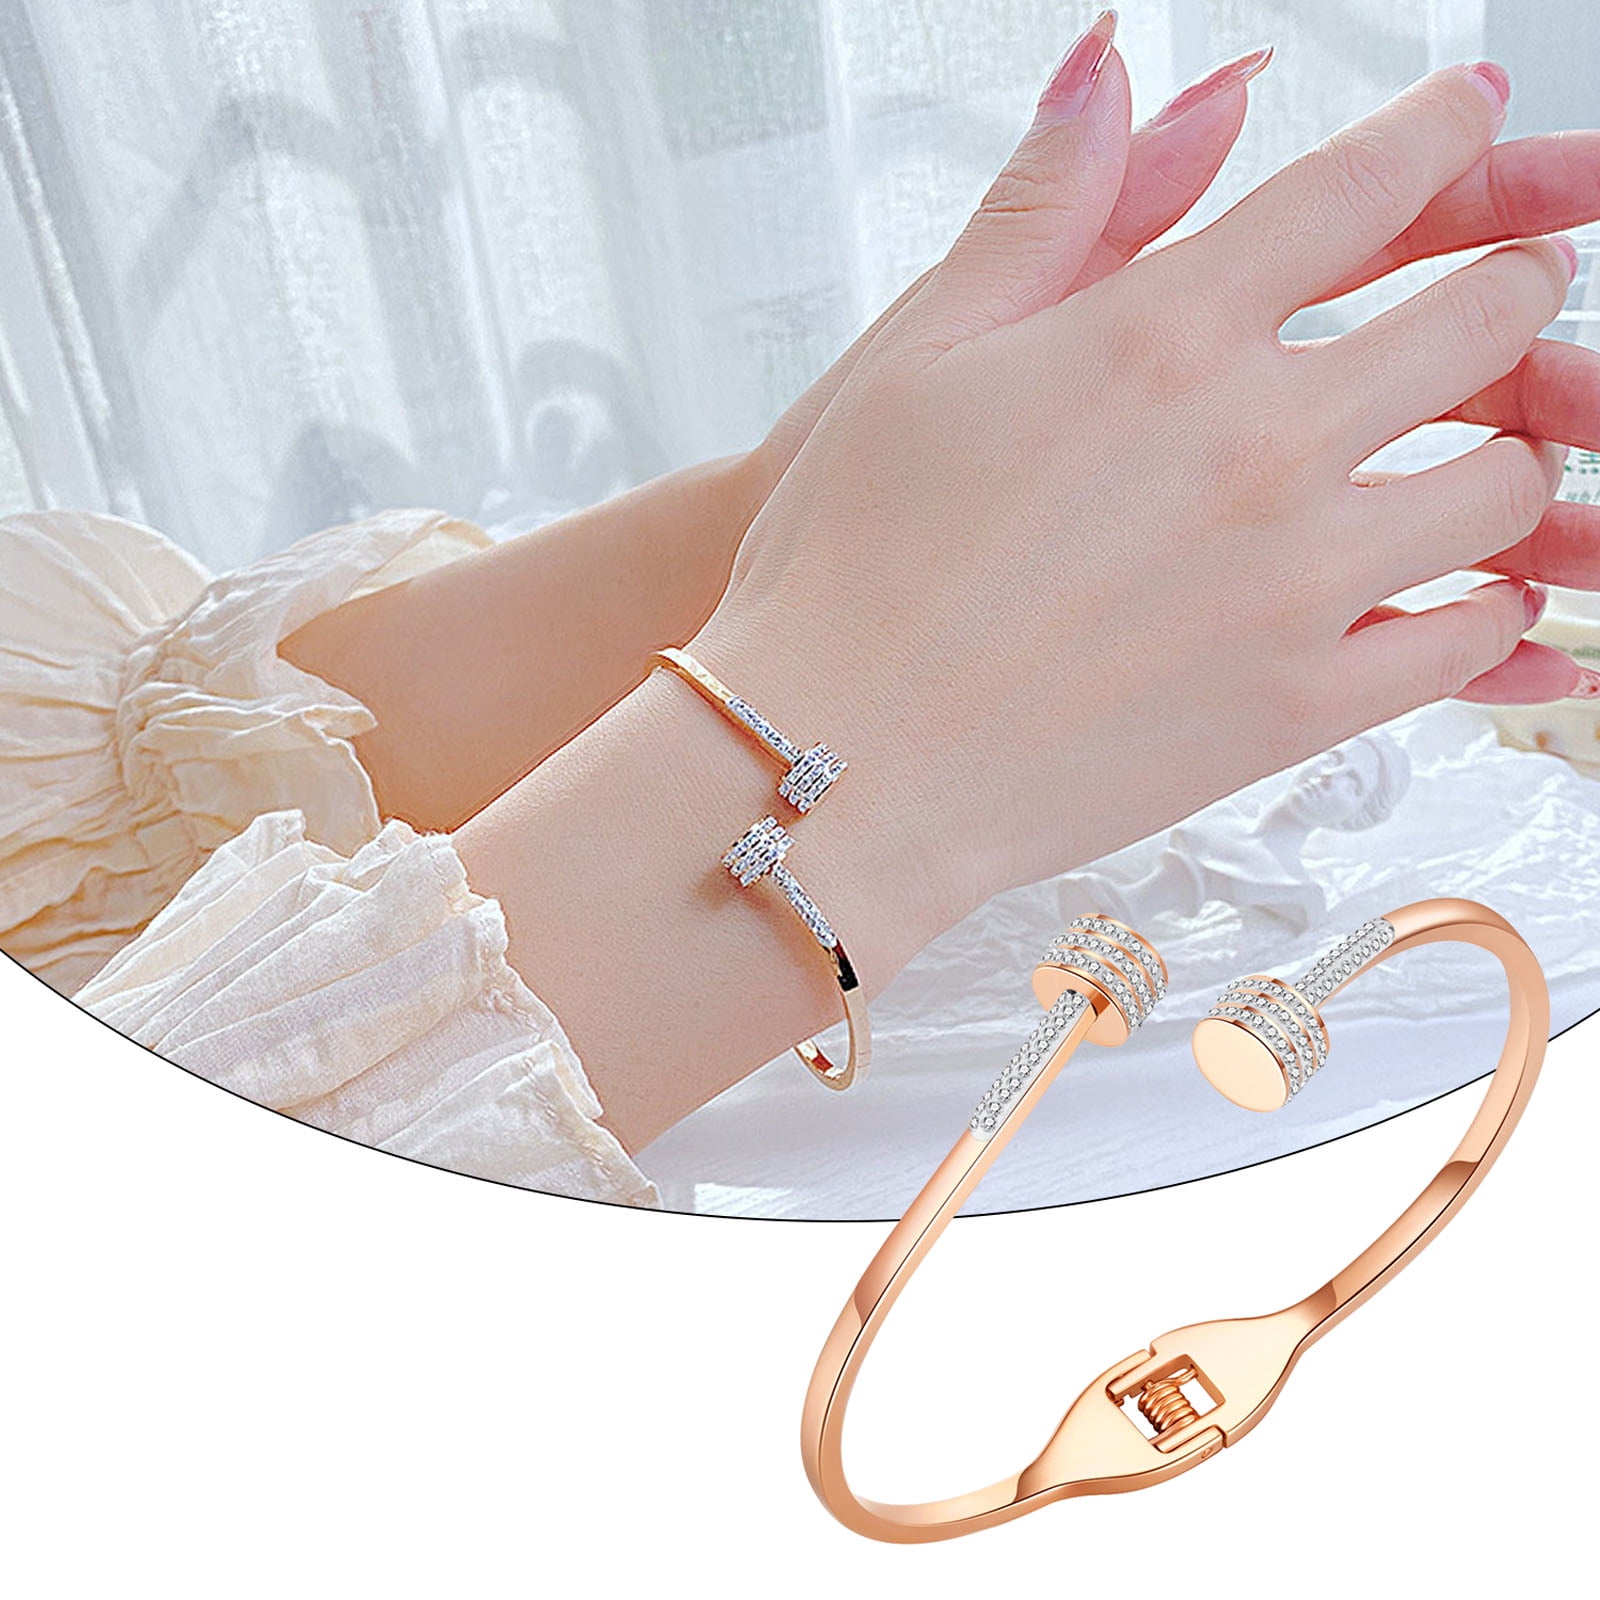 Olbye Crystal Finger Ring Bracelet Minimal Gold Slave Bracelet Hand Chain  Simple Everyday Jewelry for Women and Teen Girls : Amazon.in: Jewellery